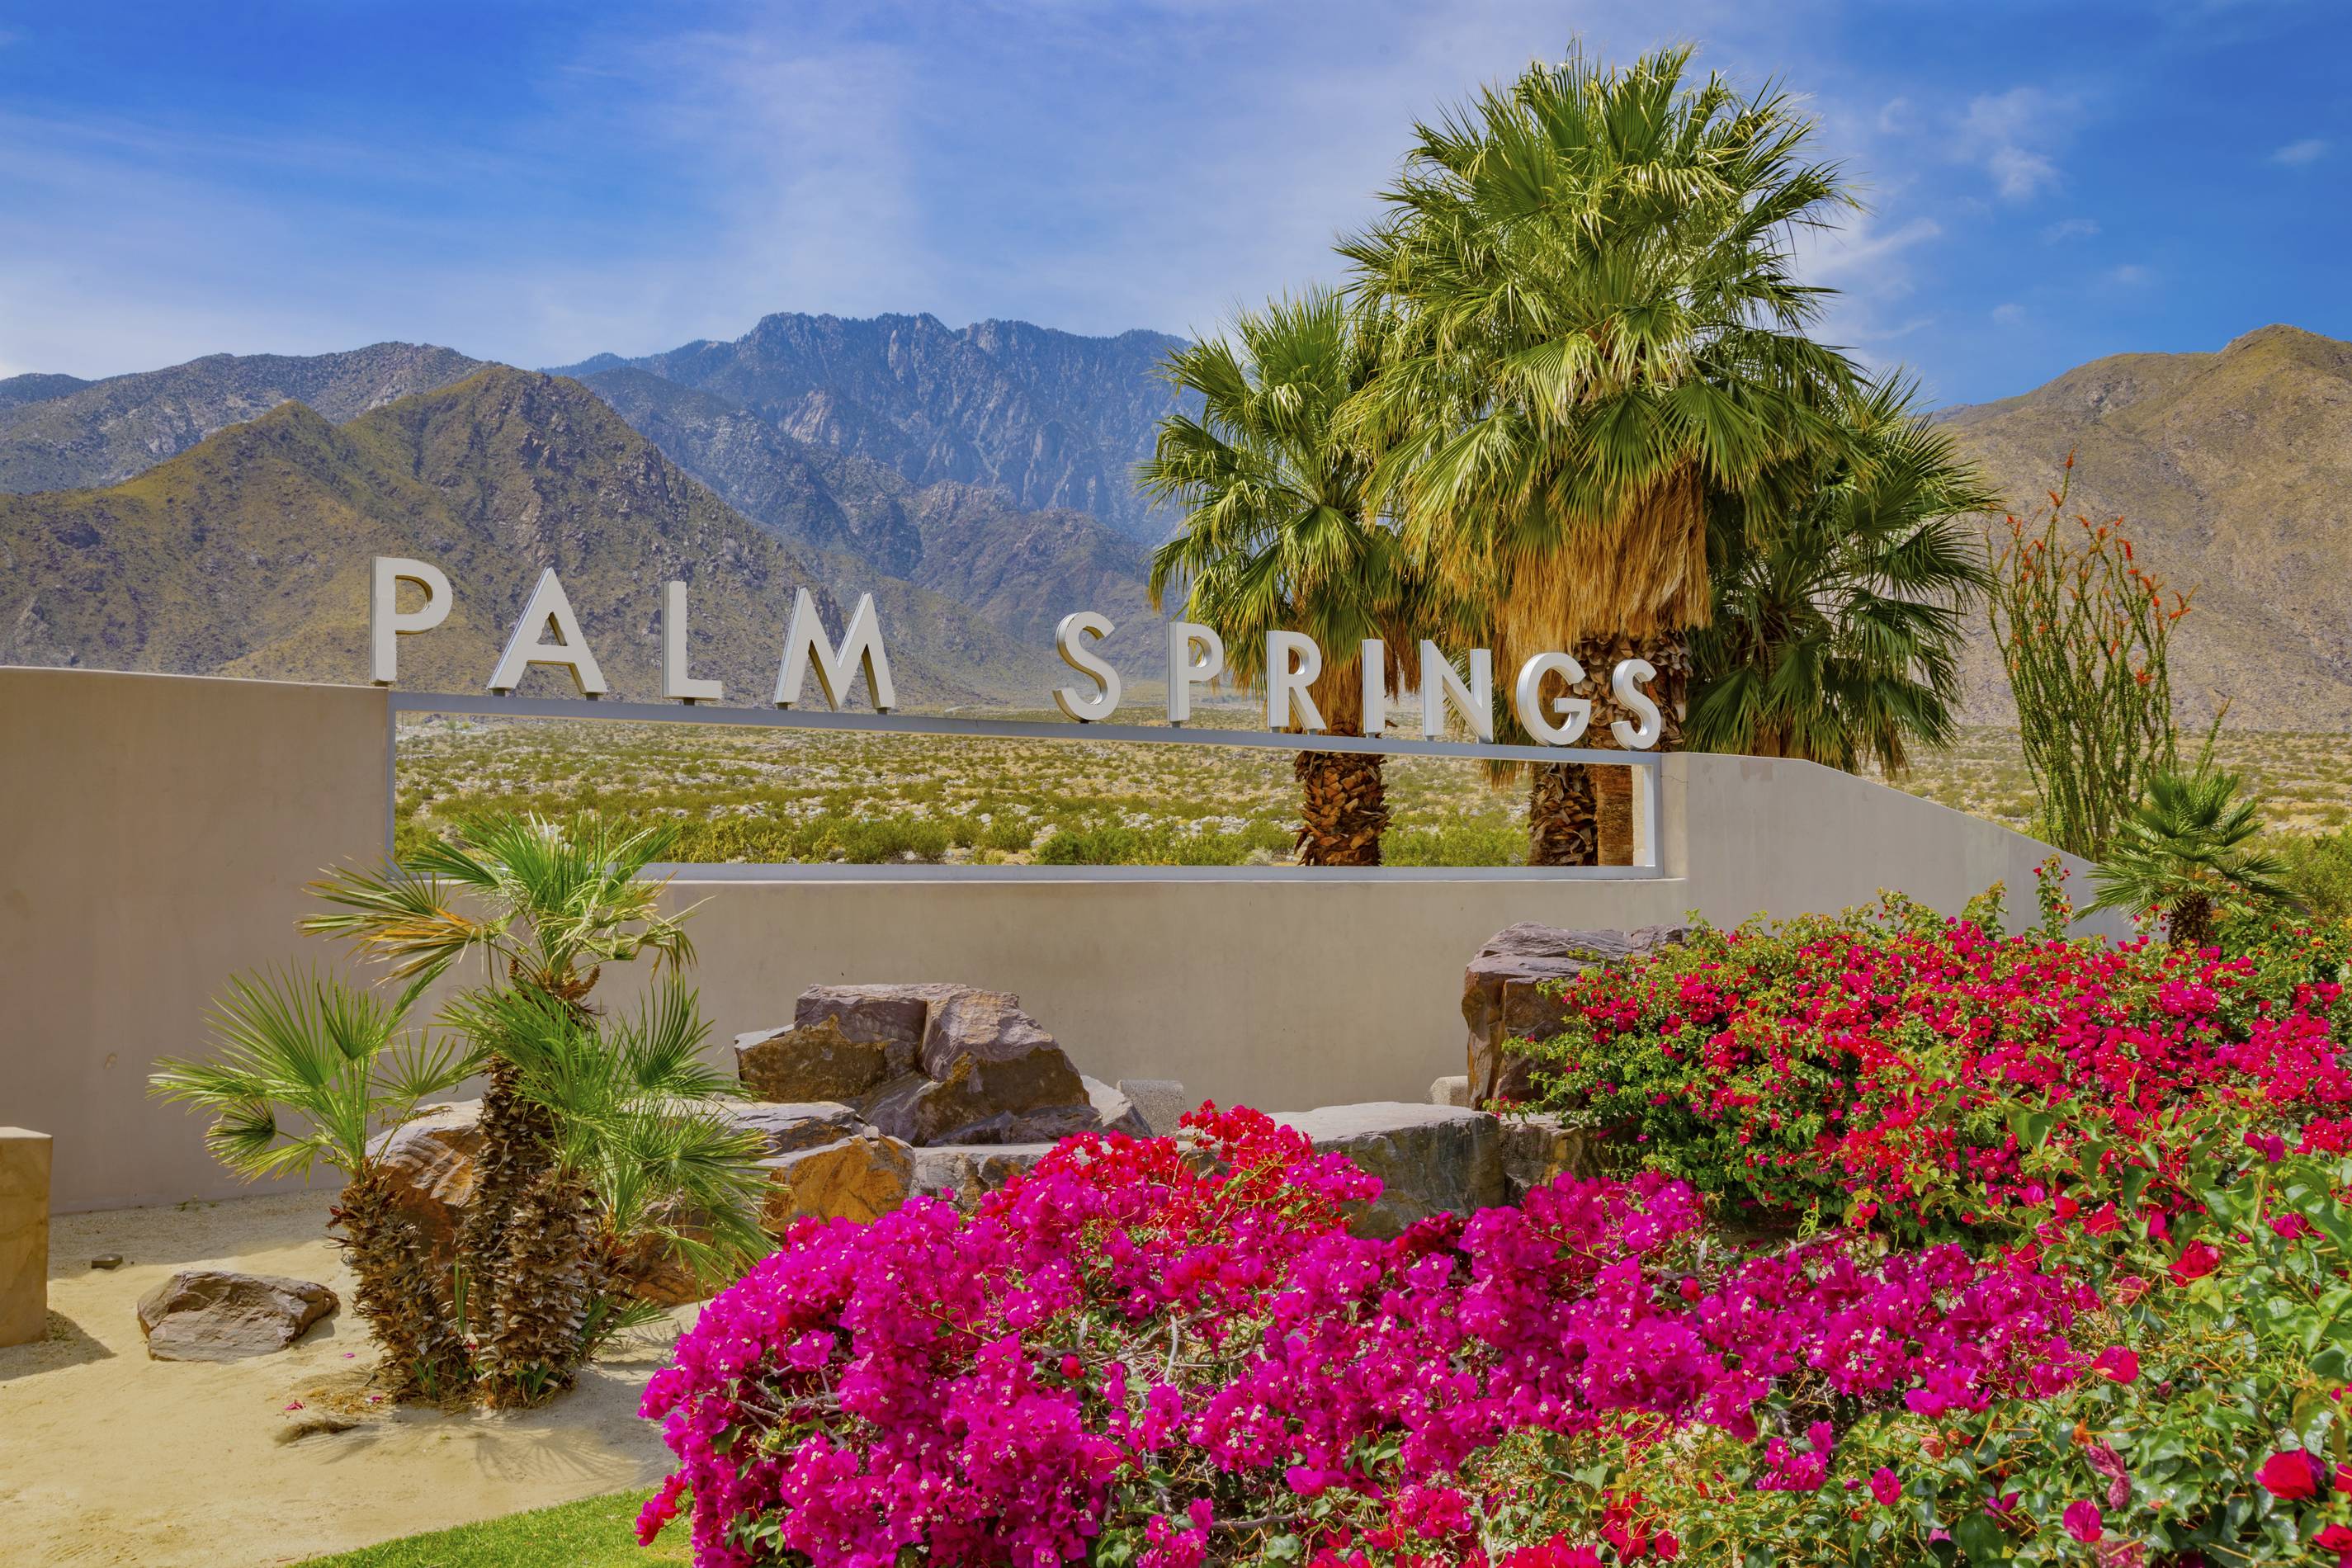 The 12 Best Restaurants In Palm Springs